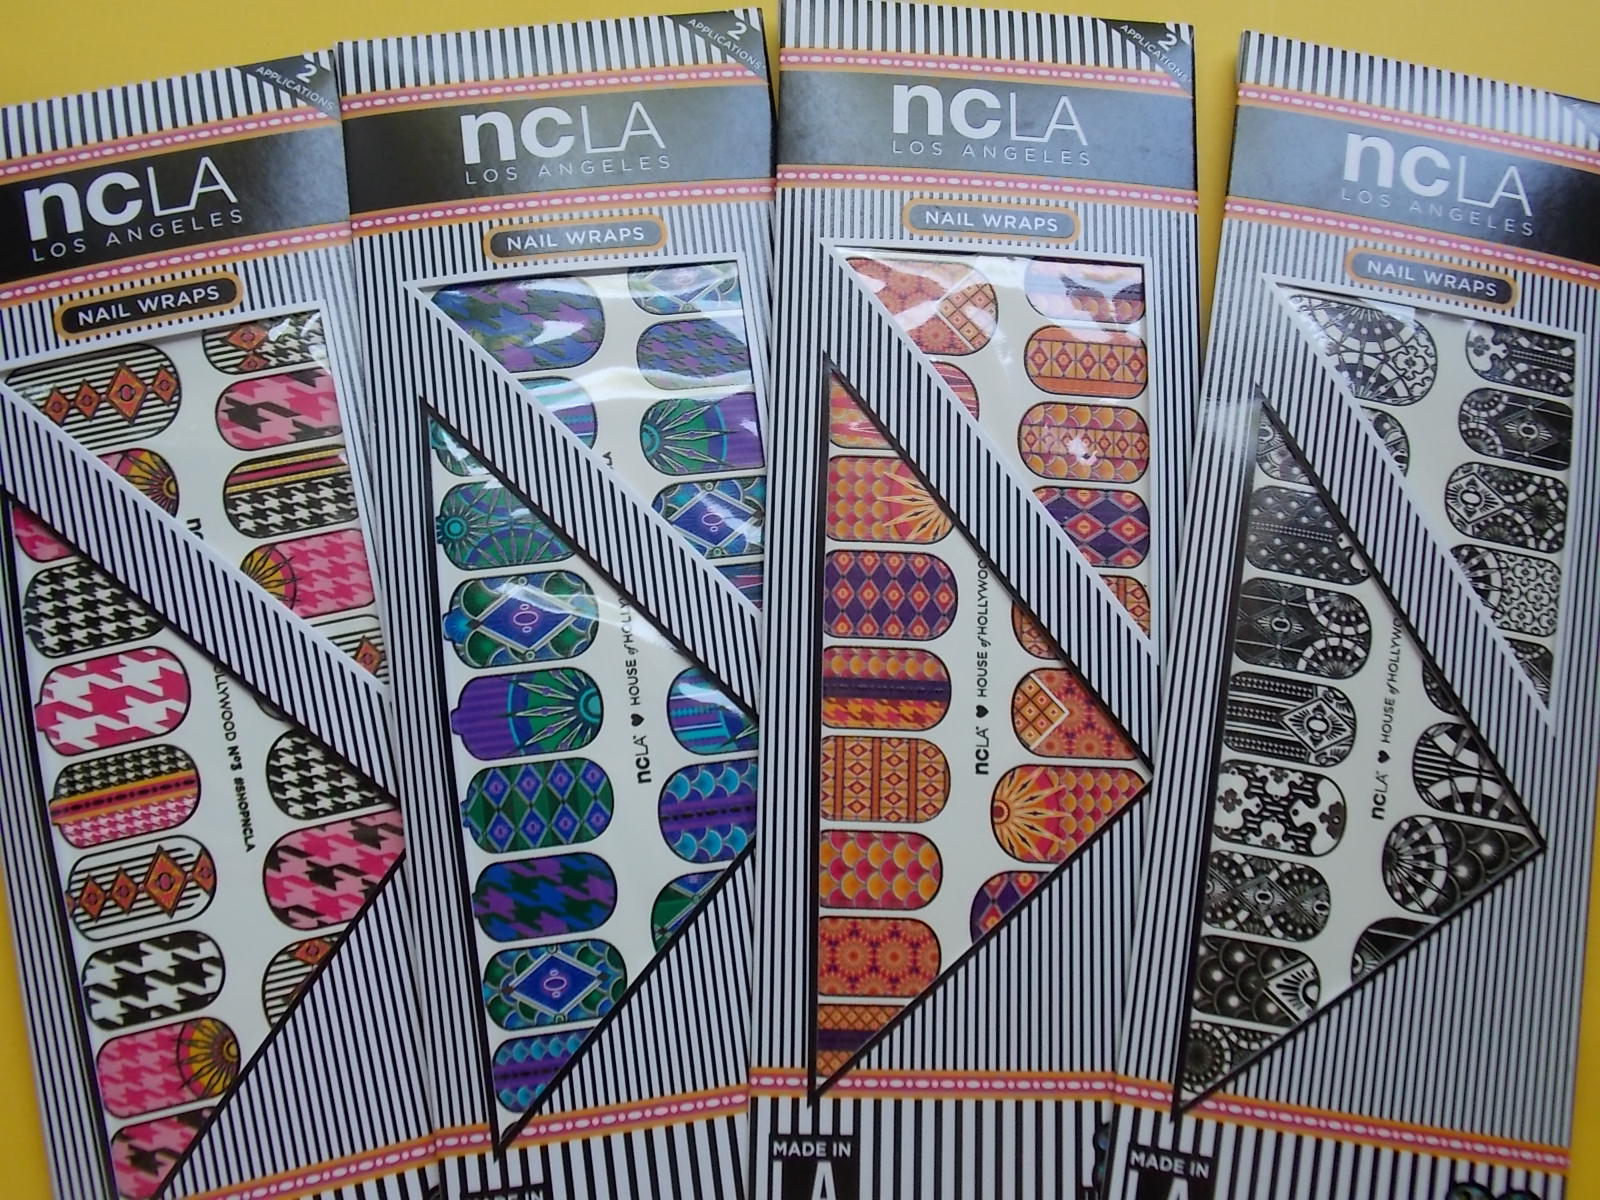 Trend, Review, Swatches, 10, Sizzling, Nail, Polish, Wrap, Designs, For, Summer, 2014, NCLA, KISS, Nail, Dress, Gel, Dress, imPRESS, Press-On, Manicure